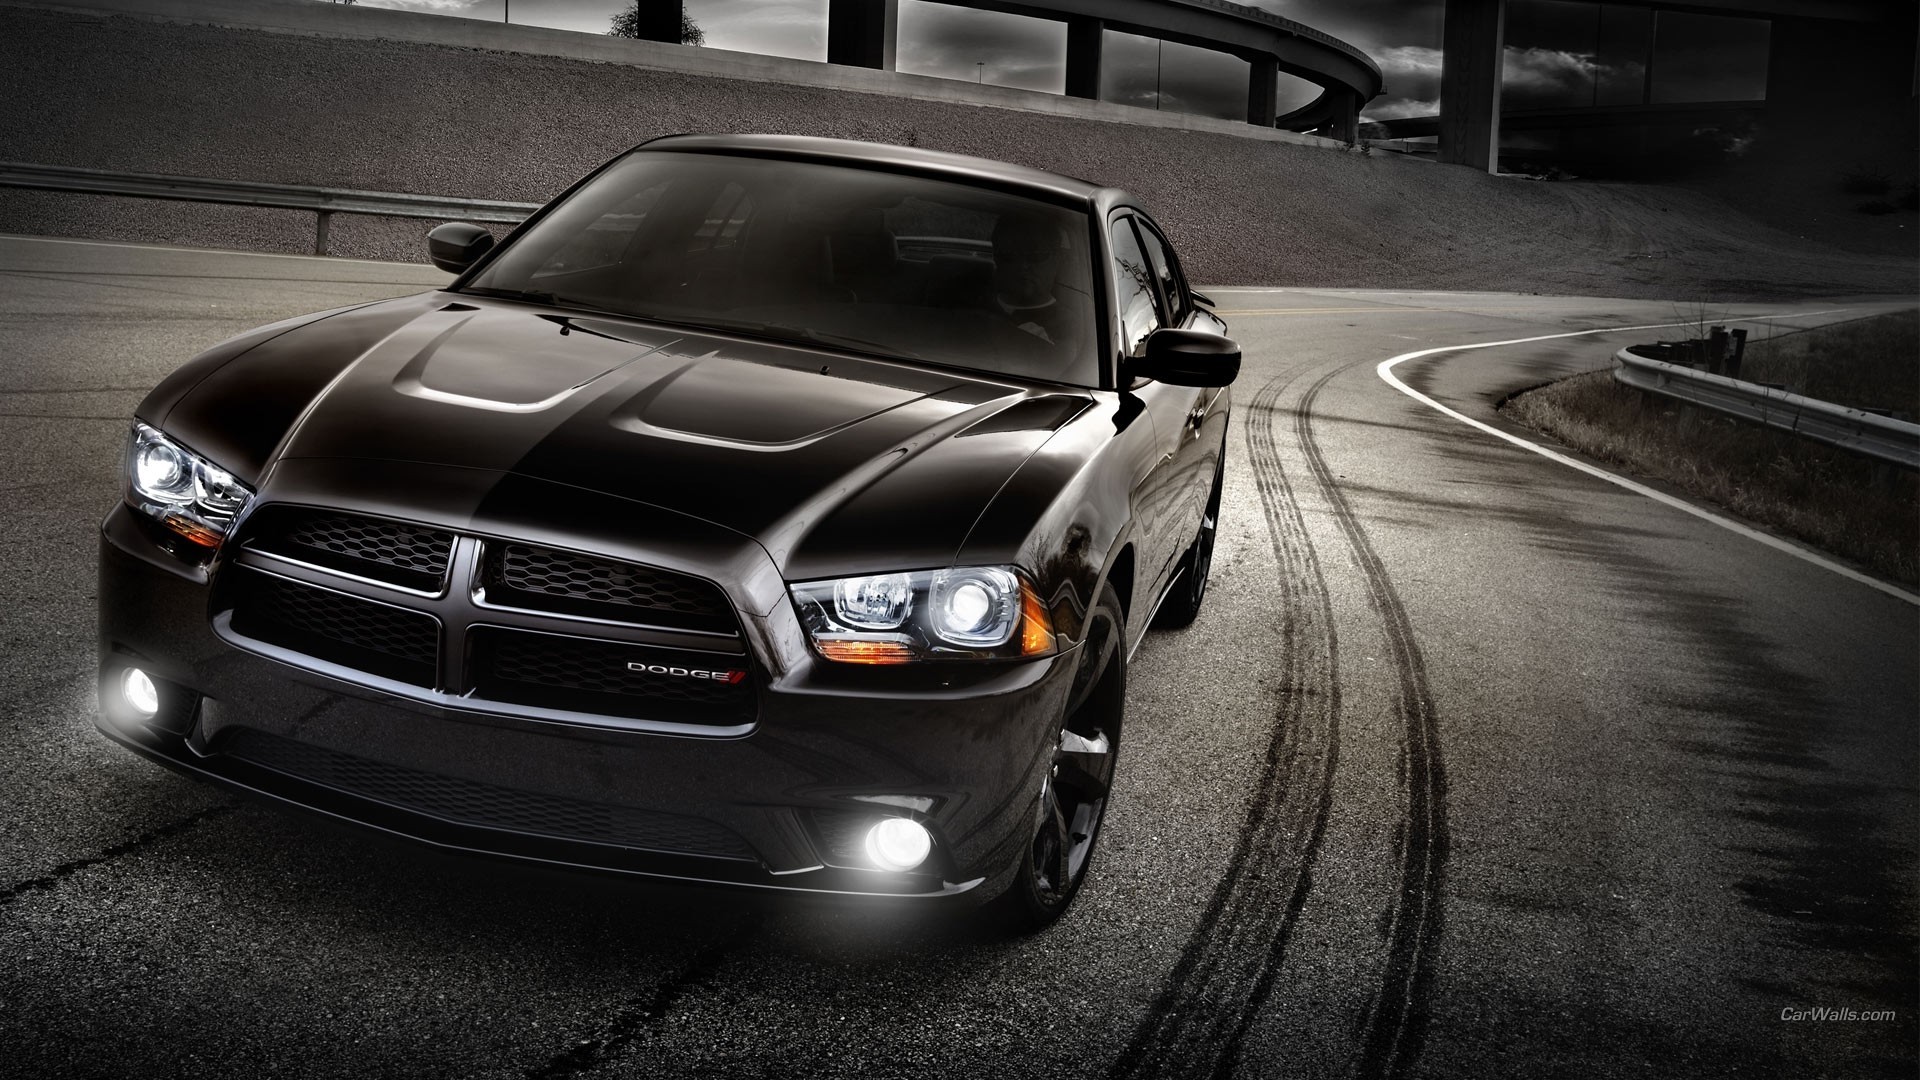 Dodge Charger Wallpaper 1920x1080